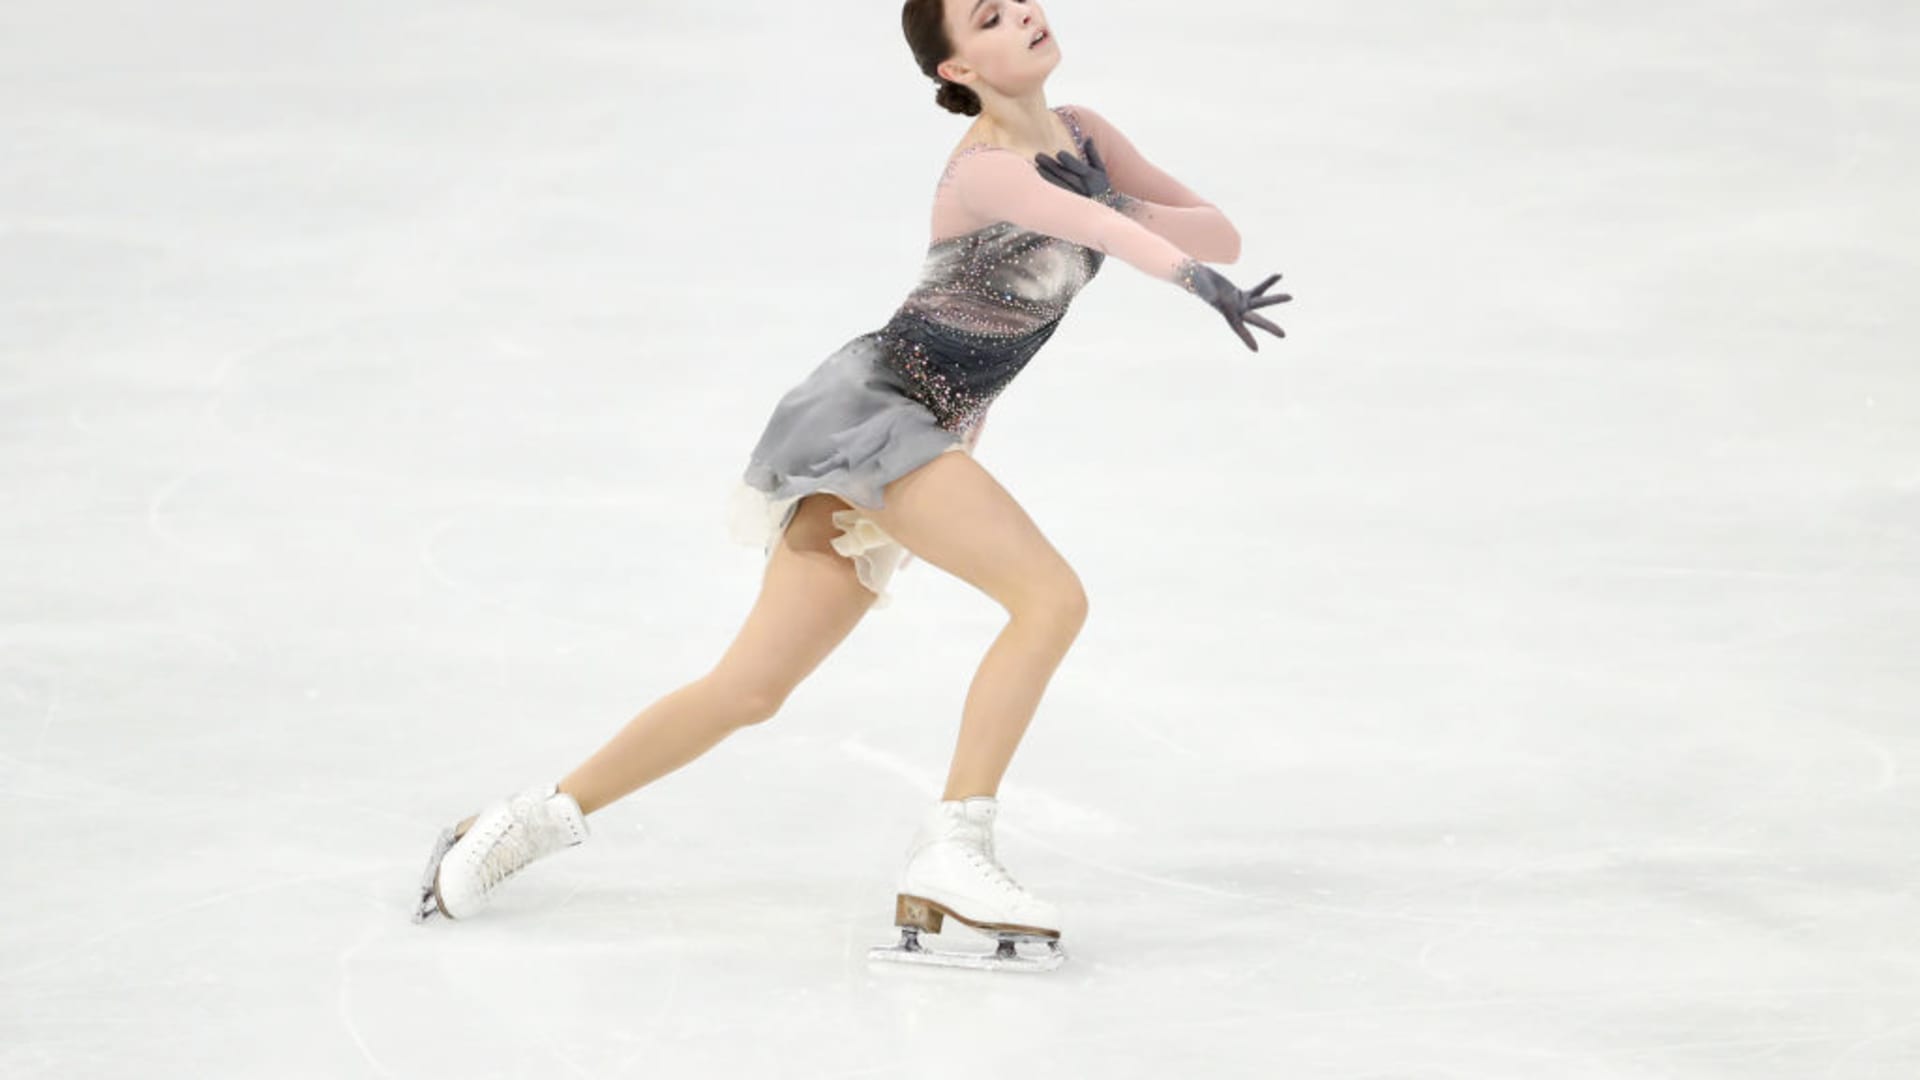 Women's figure skating competition kicks off Tuesday at Olympics